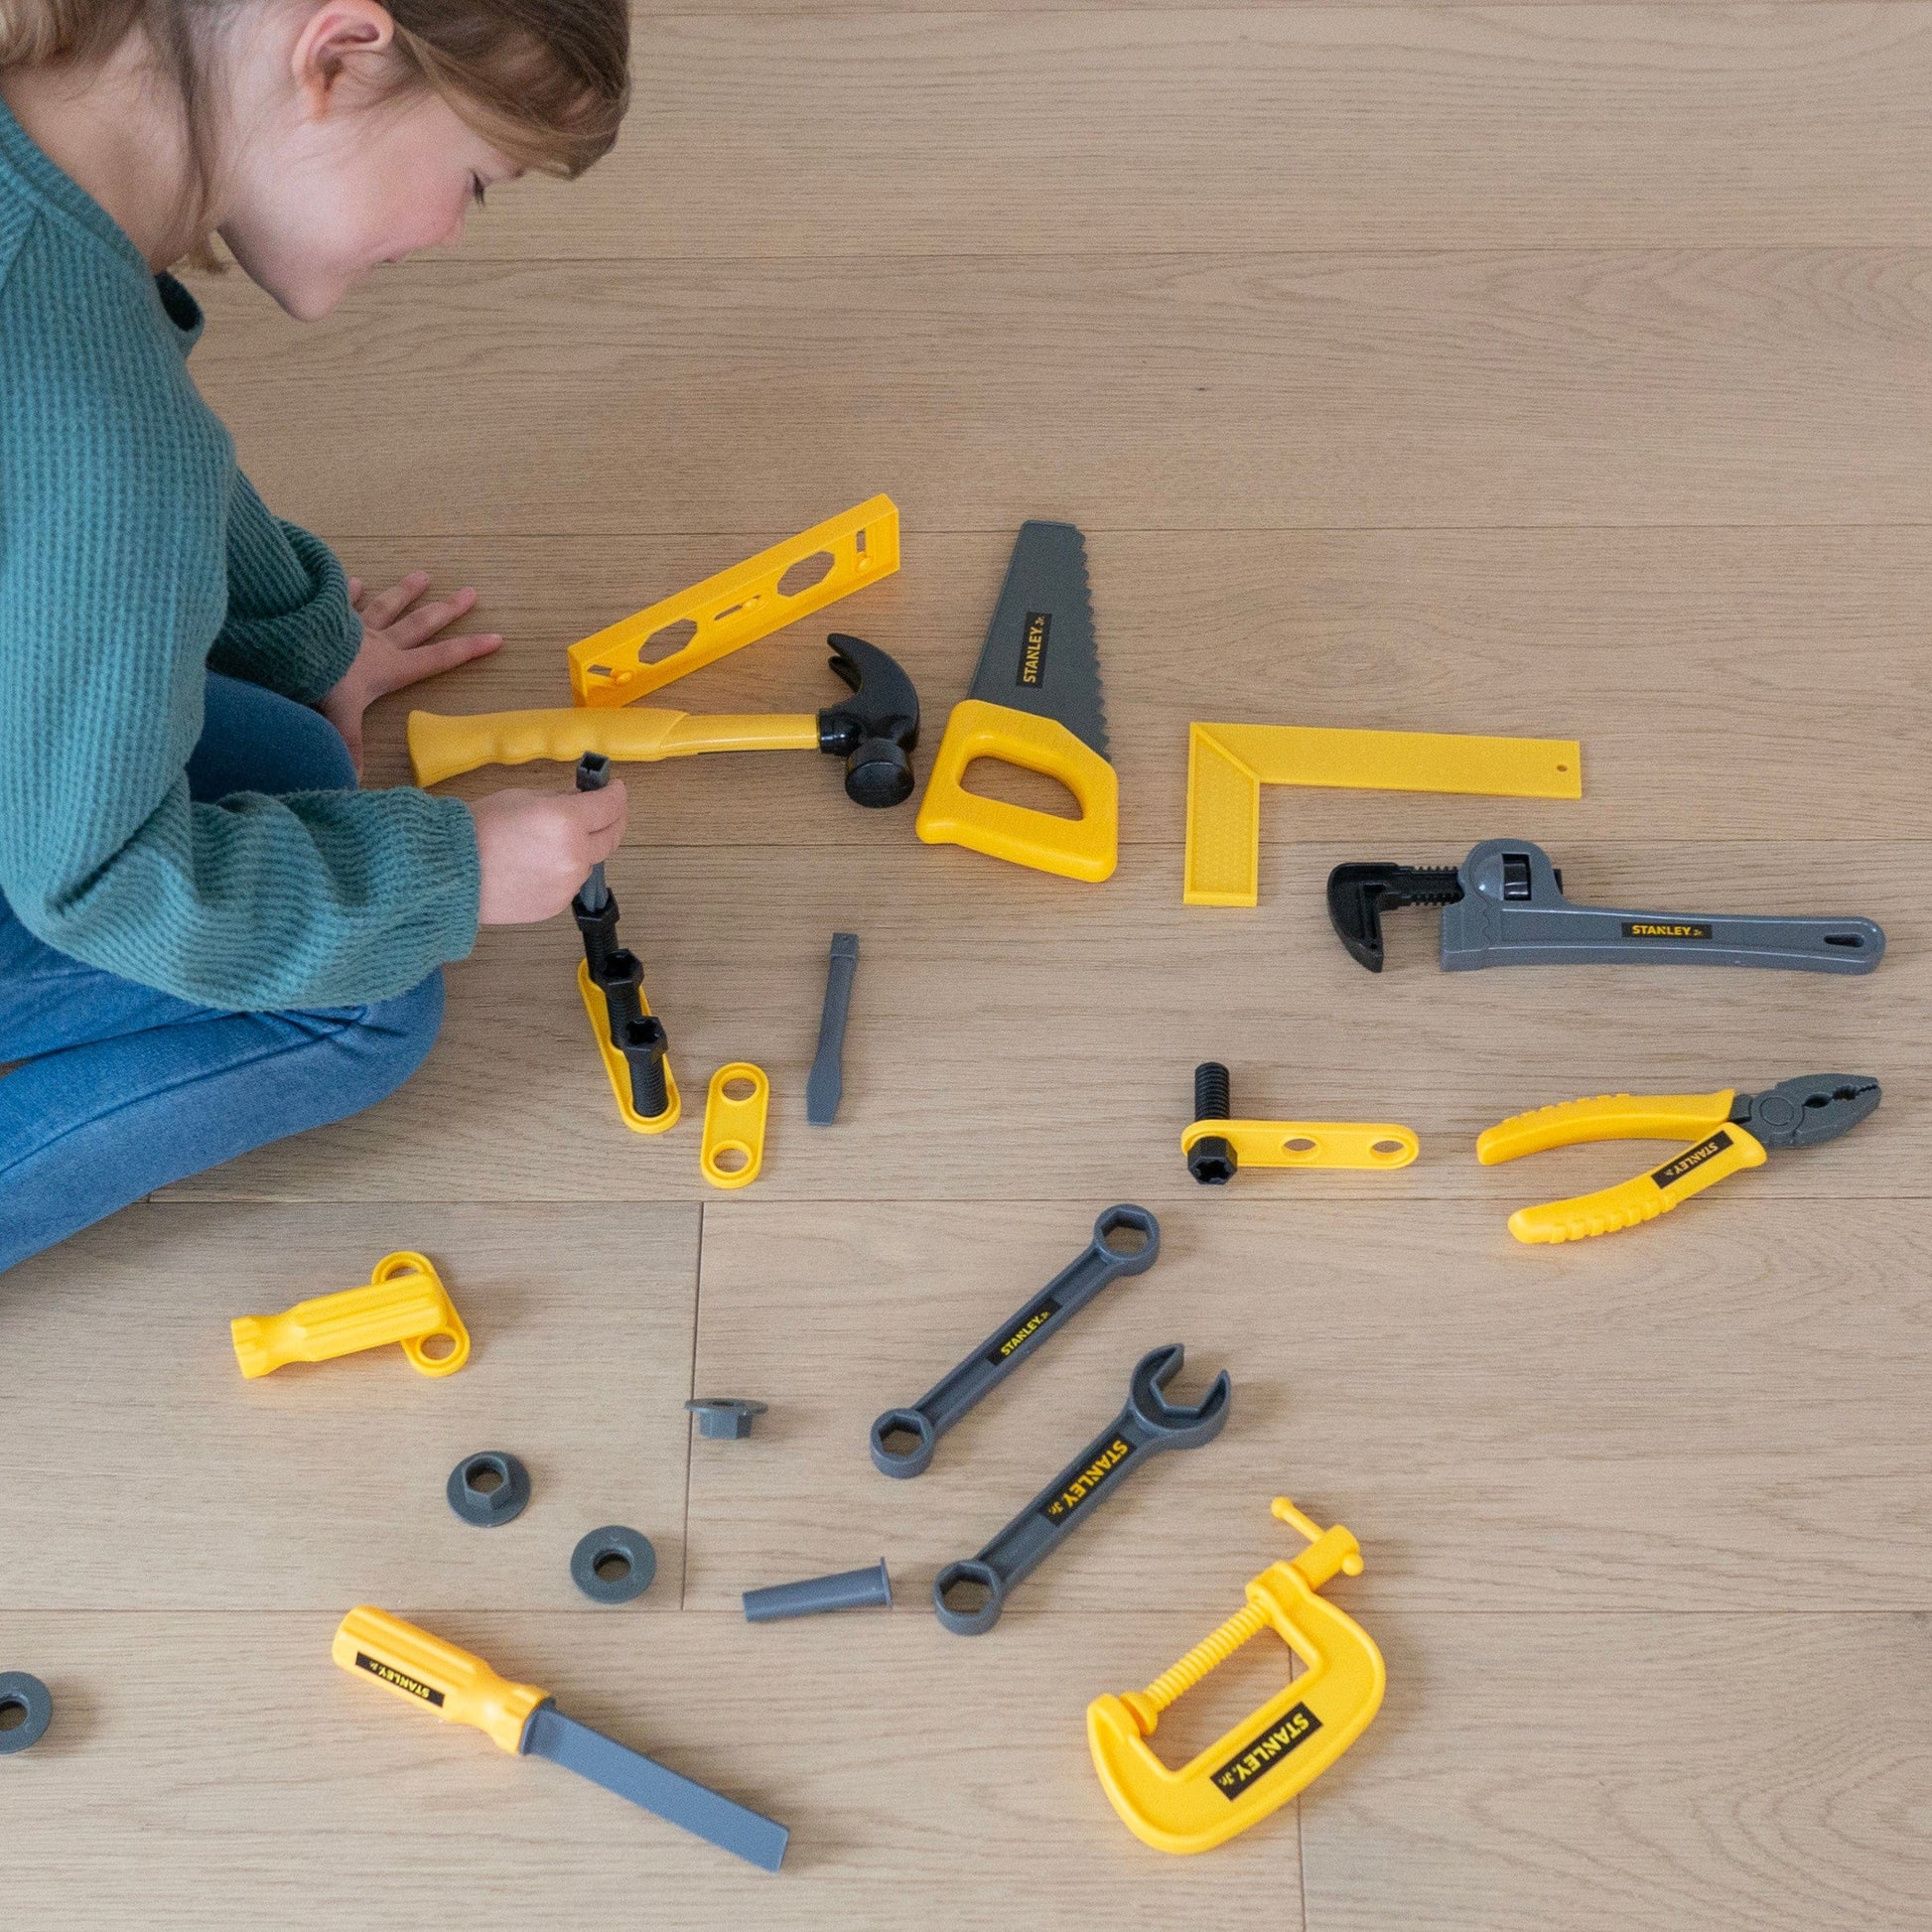 NEW Stanley Jr. 5 Piece Tool Set & Toolbox - Real Tools for Kids